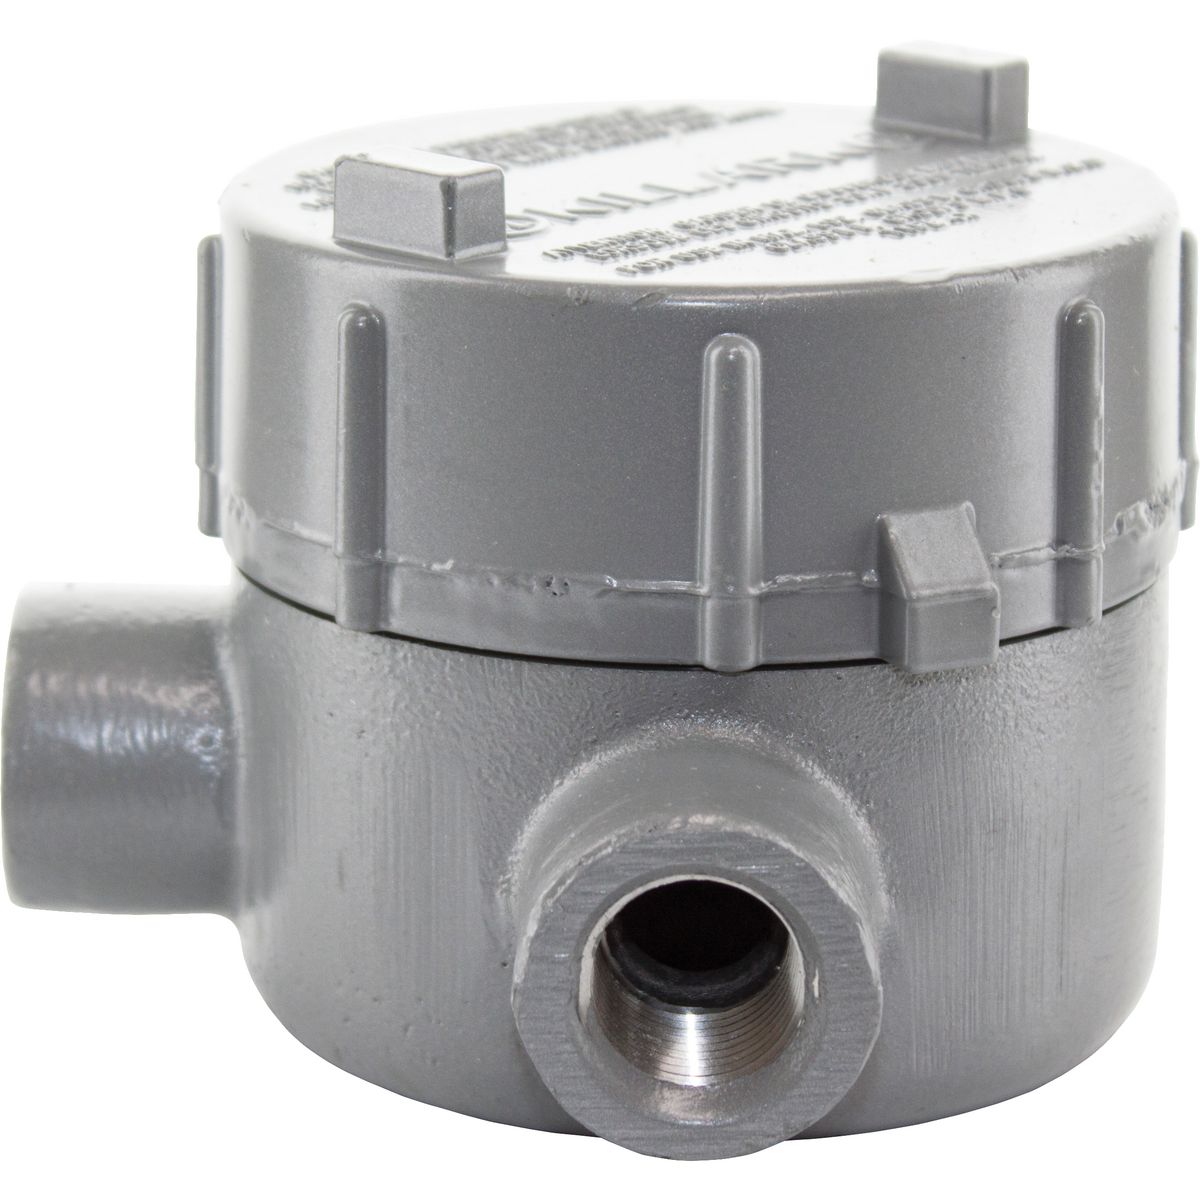 GEC SERIES FITTINGS - ALUMINUM - L TYPE OUTLET BODY - HUB SIZE 1/2 IN -VOLUME 18.0 CU IN